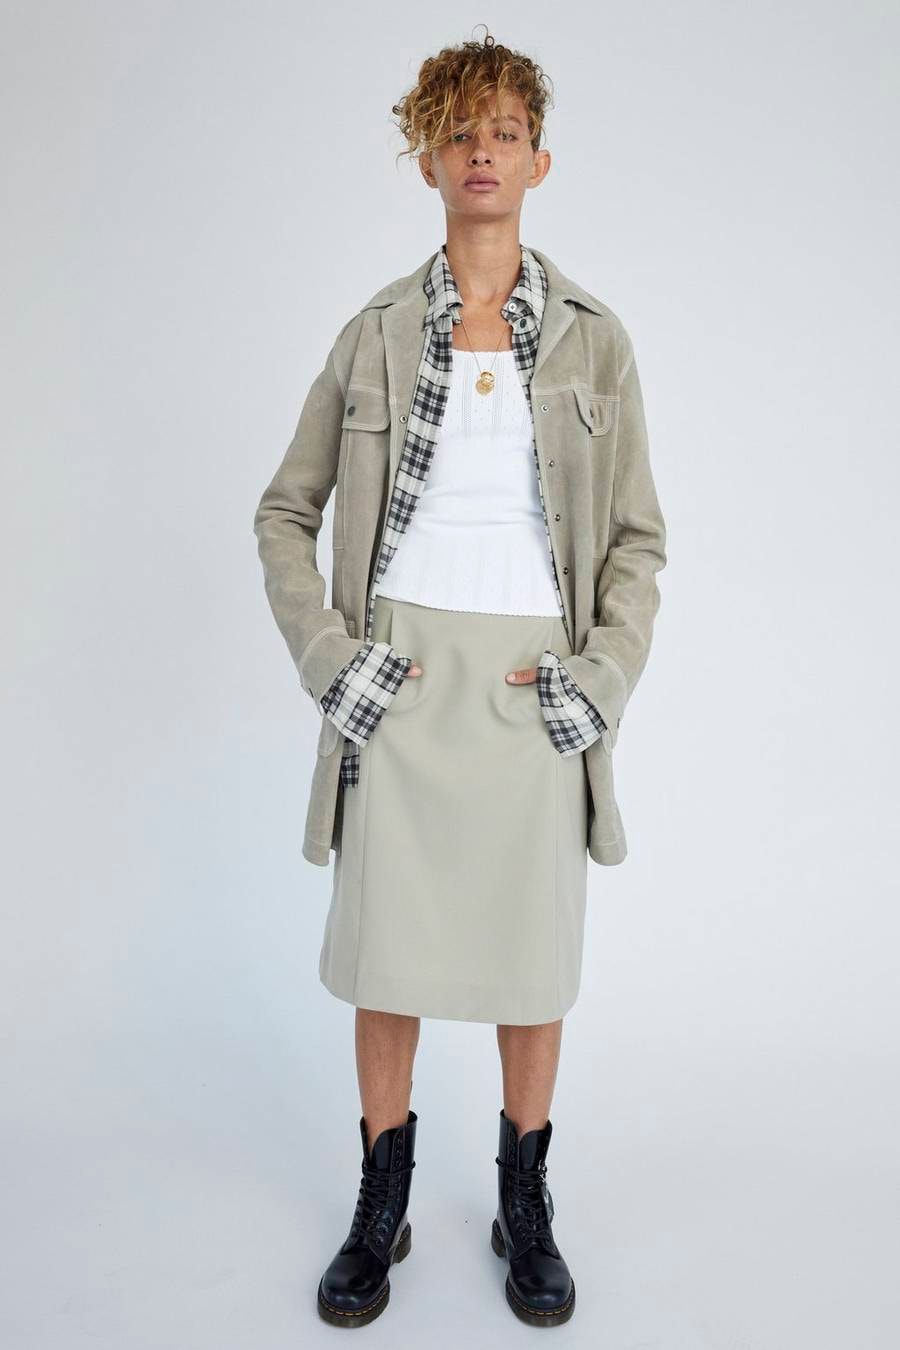 Marc Jacobs Resort 2019 Redux Collection Suede Overshirt A-Line Skirt Tan Pointelle Tank Top White Dr. Martens 10-Eye Leather Boot Black